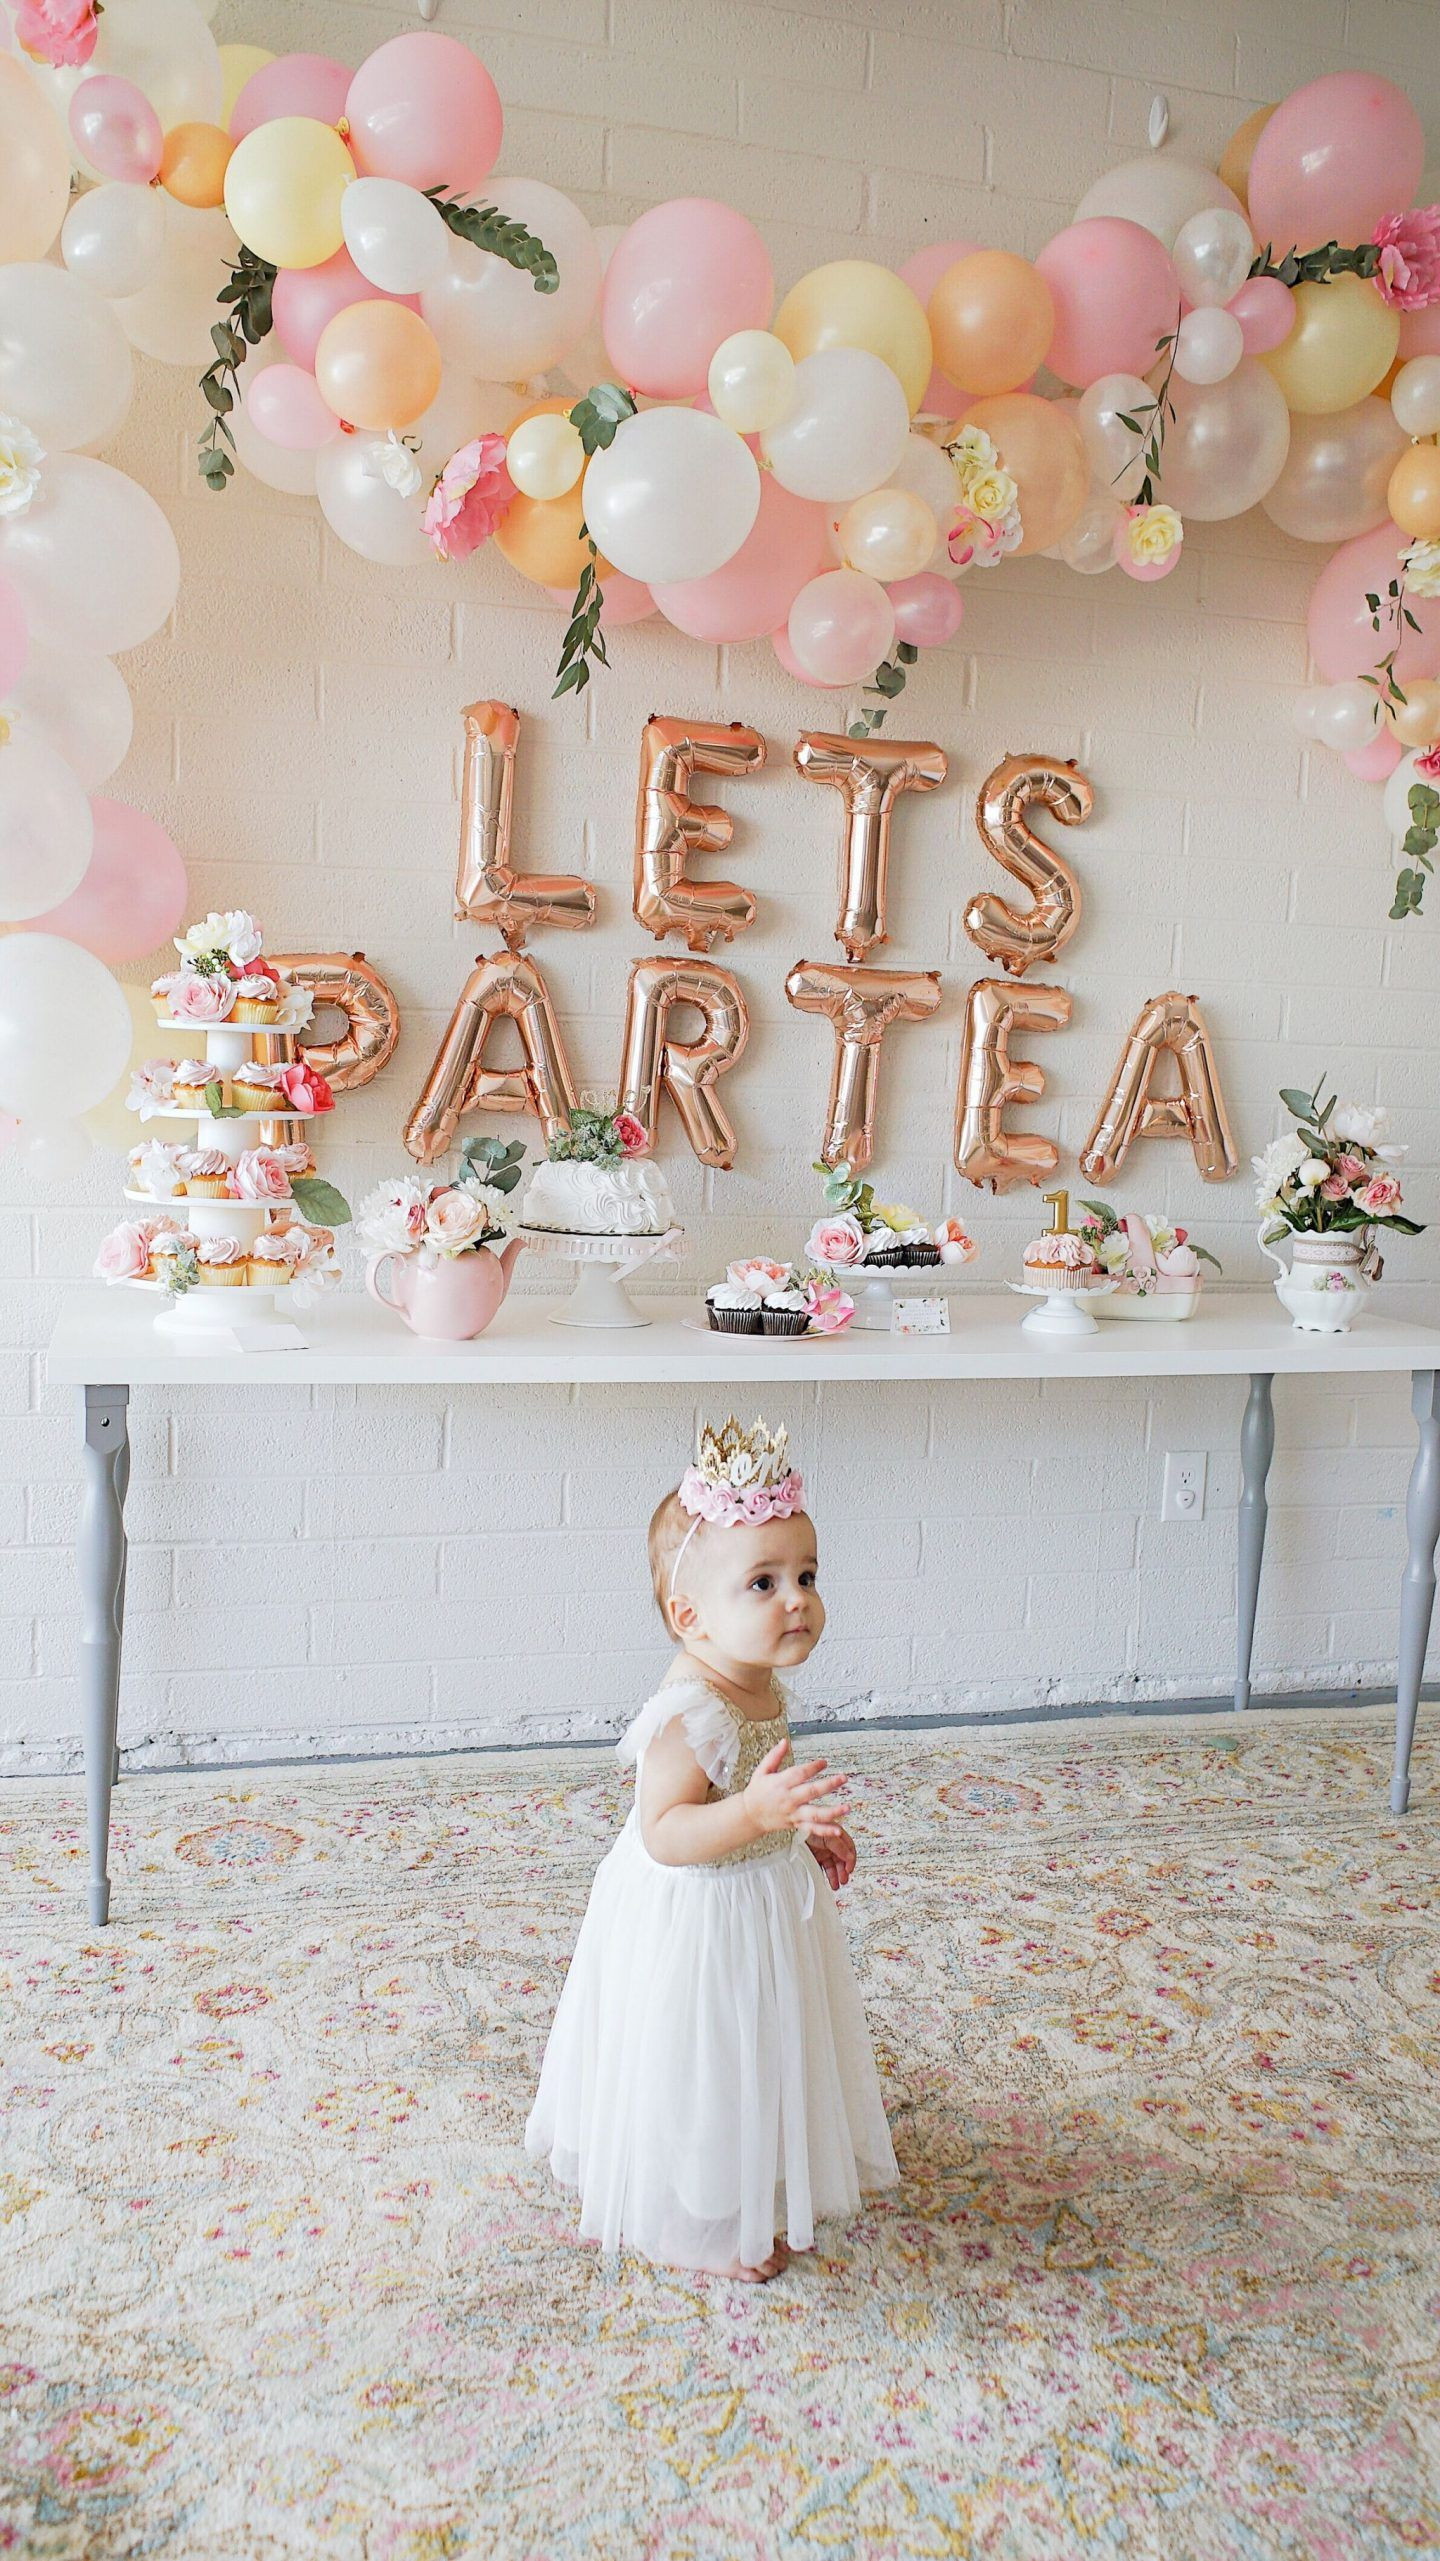 Tea Party Themed Birthday Party Ideas
 first birthday tea party lets partea birthday decor